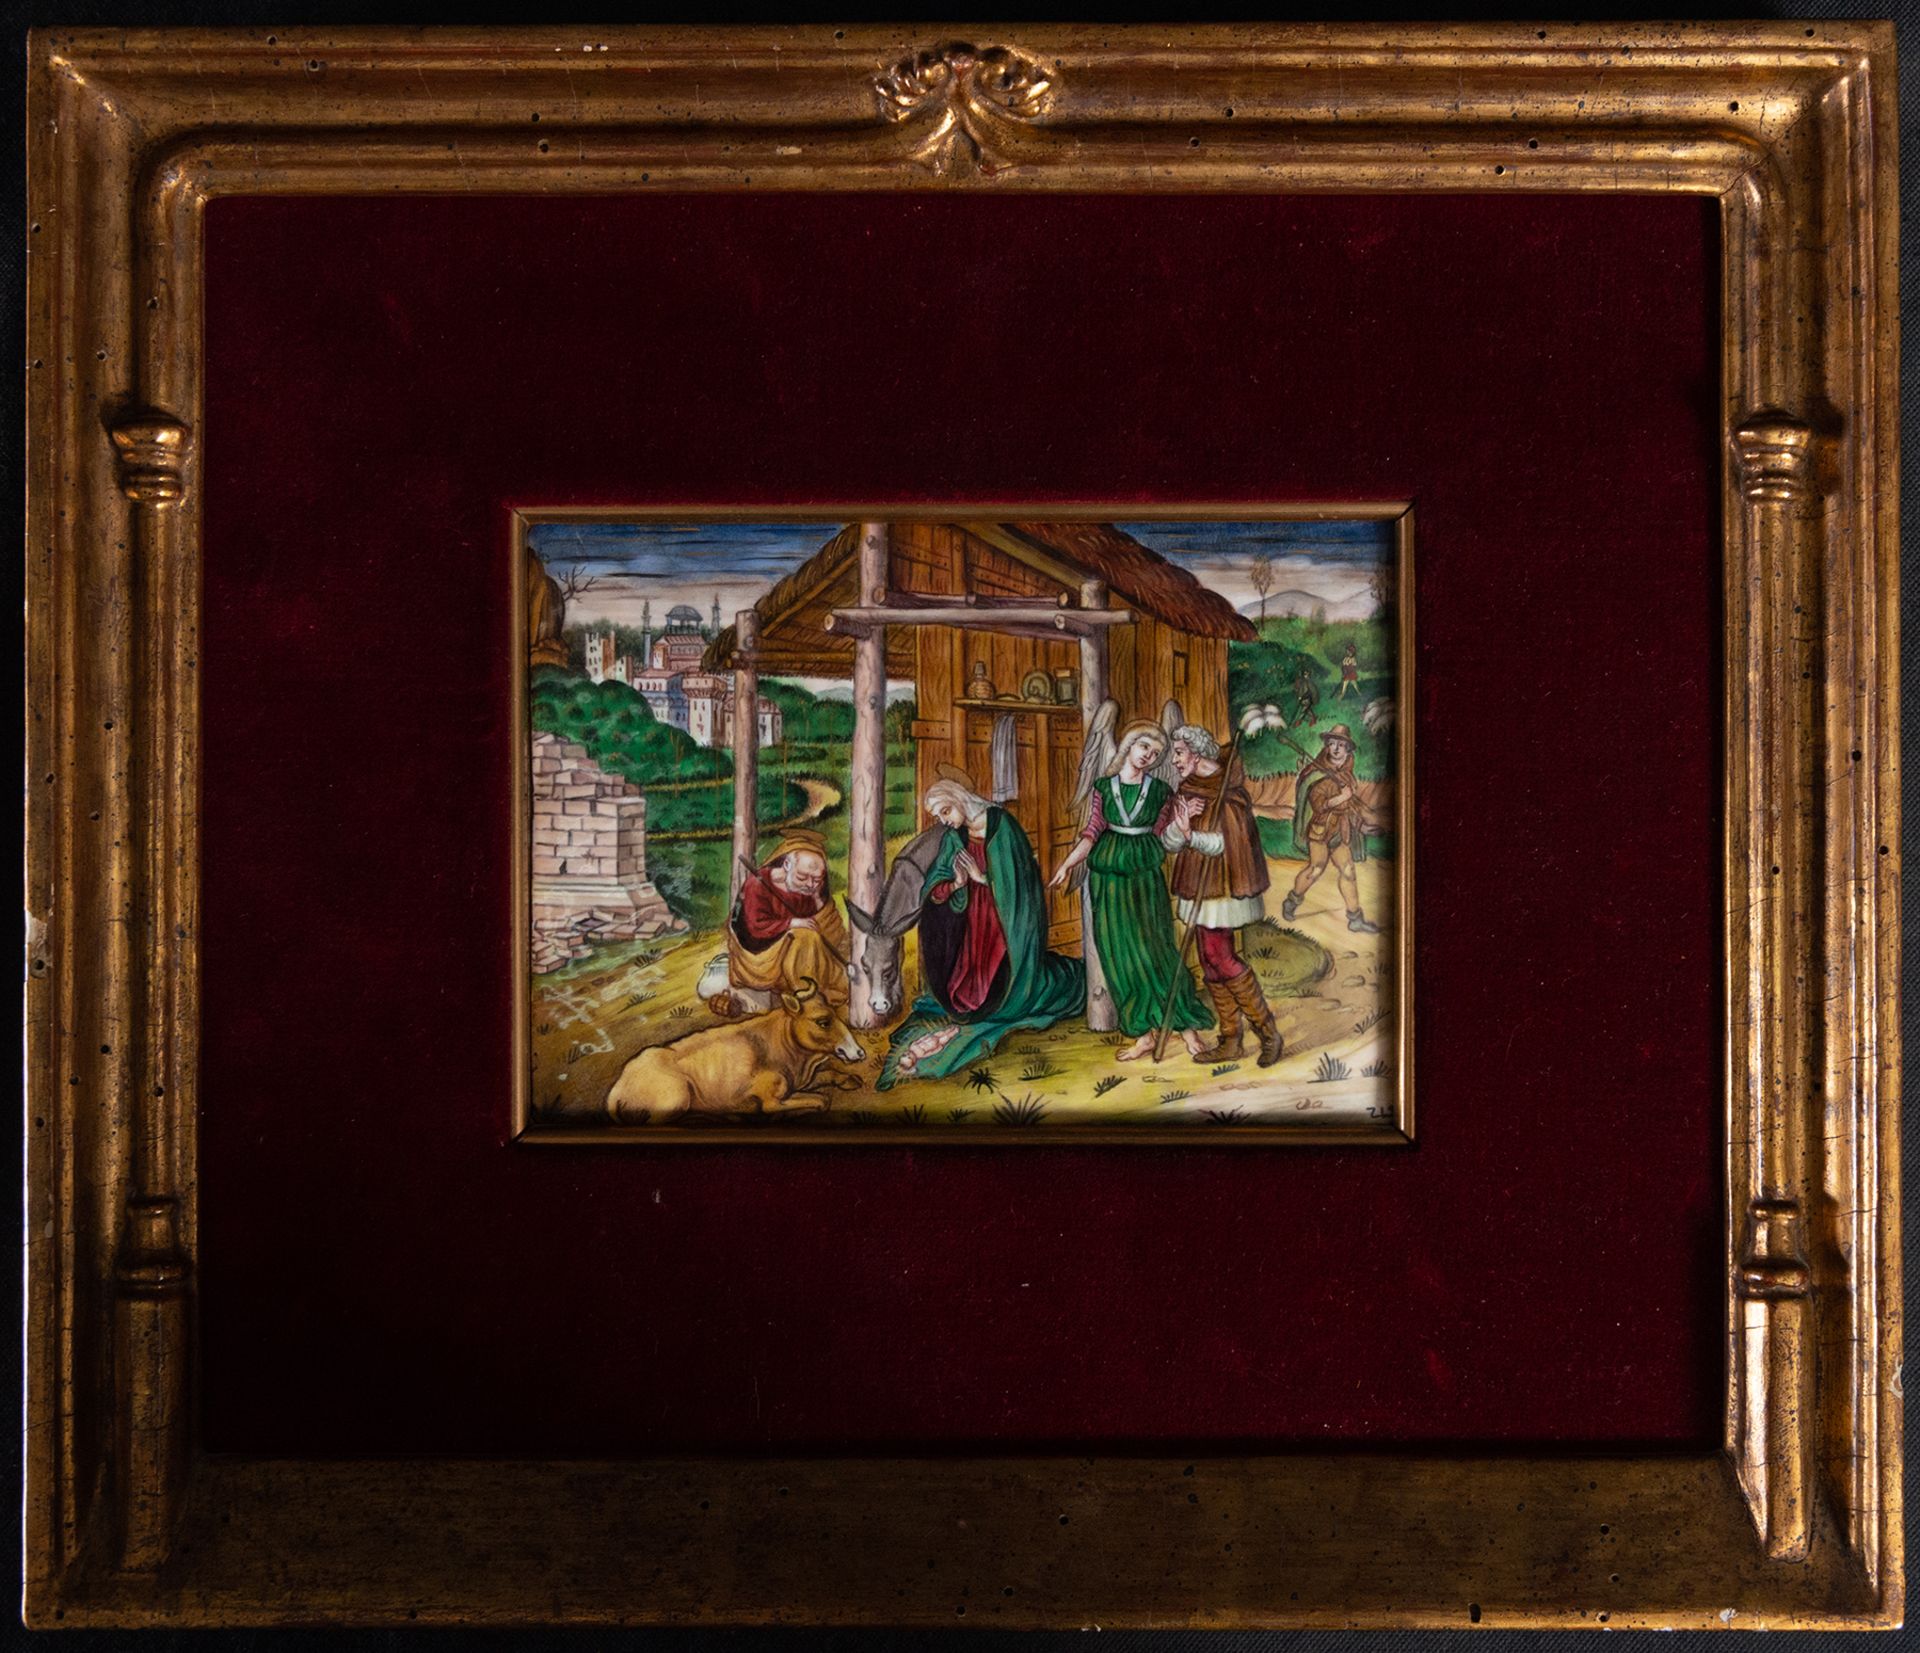 Following Limoges Gothic Models, late 19th century, Adoration of the Shepherds